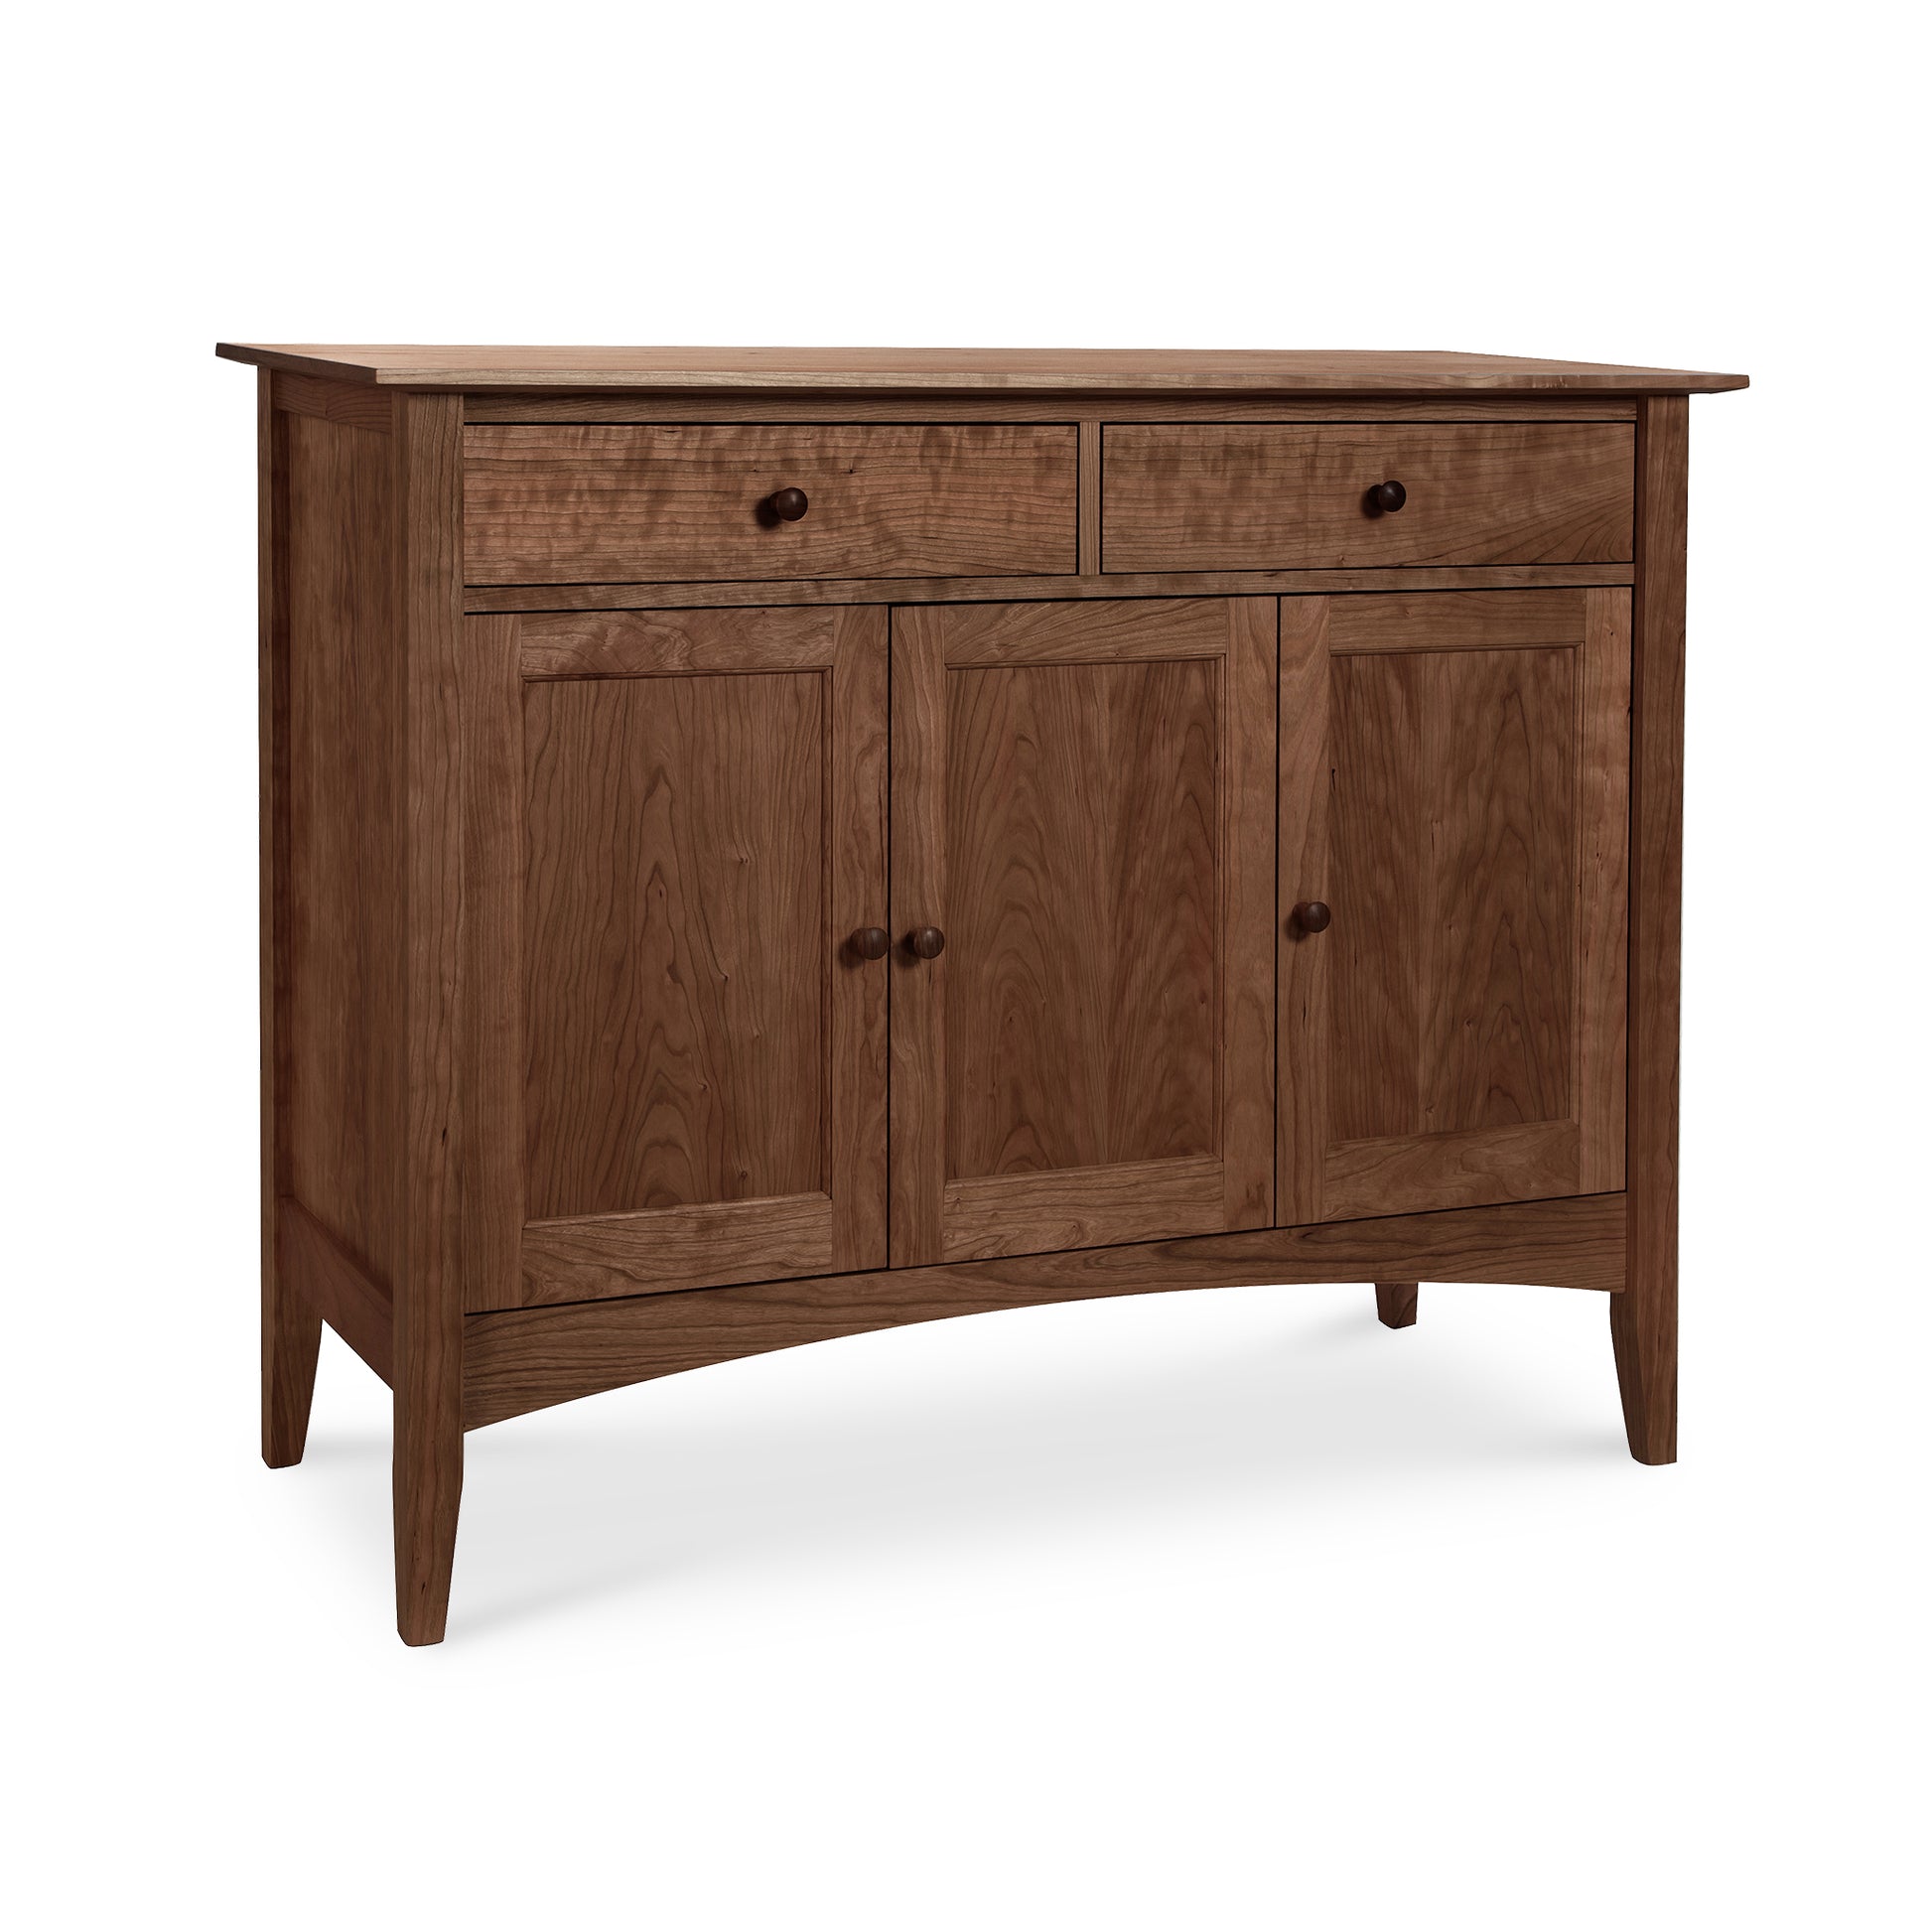 A large Maple Corner Woodworks American Shaker sideboard with two cabinet doors and two drawers, constructed from solid hardwood, isolated on a white background.